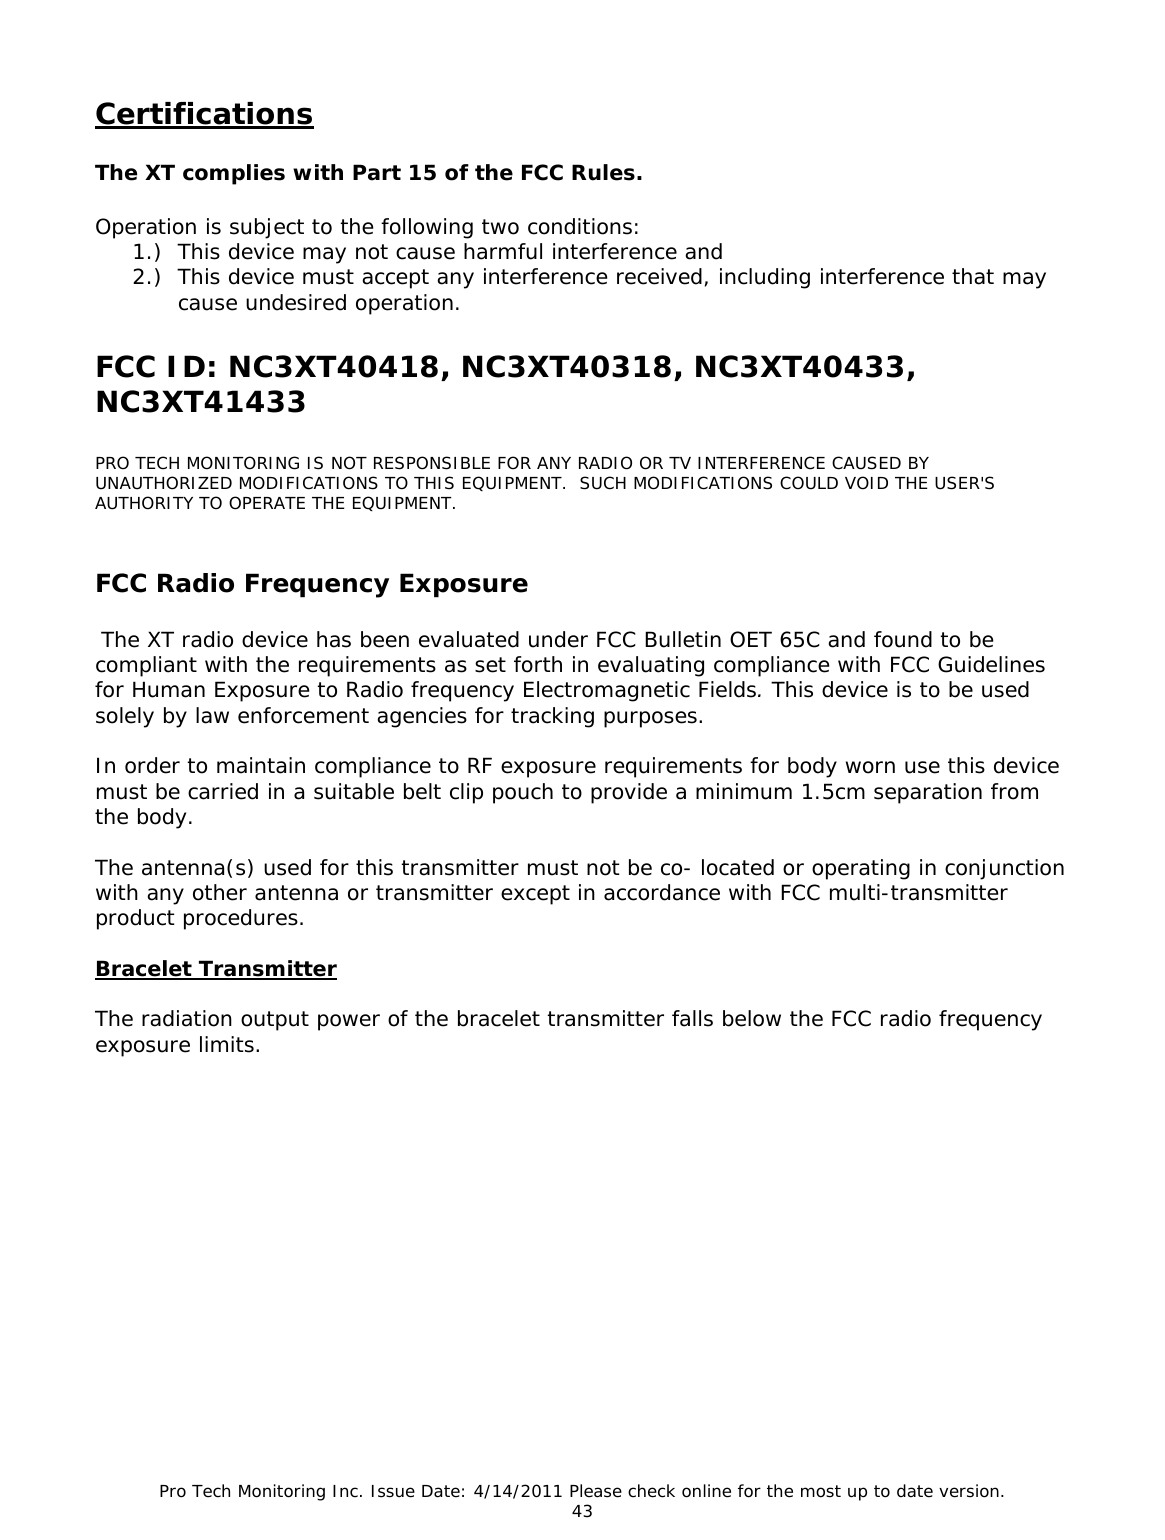 Pro Tech Monitoring Inc. Issue Date: 4/14/2011 Please check online for the most up to date version. 43  Certifications  The XT complies with Part 15 of the FCC Rules.    Operation is subject to the following two conditions:   1.) This device may not cause harmful interference and  2.) This device must accept any interference received, including interference that may cause undesired operation.  FCC ID: NC3XT40418, NC3XT40318, NC3XT40433, NC3XT41433  PRO TECH MONITORING IS NOT RESPONSIBLE FOR ANY RADIO OR TV INTERFERENCE CAUSED BY UNAUTHORIZED MODIFICATIONS TO THIS EQUIPMENT.  SUCH MODIFICATIONS COULD VOID THE USER&apos;S AUTHORITY TO OPERATE THE EQUIPMENT.   FCC Radio Frequency Exposure   The XT radio device has been evaluated under FCC Bulletin OET 65C and found to be compliant with the requirements as set forth in evaluating compliance with FCC Guidelines for Human Exposure to Radio frequency Electromagnetic Fields. This device is to be used solely by law enforcement agencies for tracking purposes.    In order to maintain compliance to RF exposure requirements for body worn use this device must be carried in a suitable belt clip pouch to provide a minimum 1.5cm separation from the body.    The antenna(s) used for this transmitter must not be co- located or operating in conjunction with any other antenna or transmitter except in accordance with FCC multi-transmitter product procedures.   Bracelet Transmitter  The radiation output power of the bracelet transmitter falls below the FCC radio frequency exposure limits.         